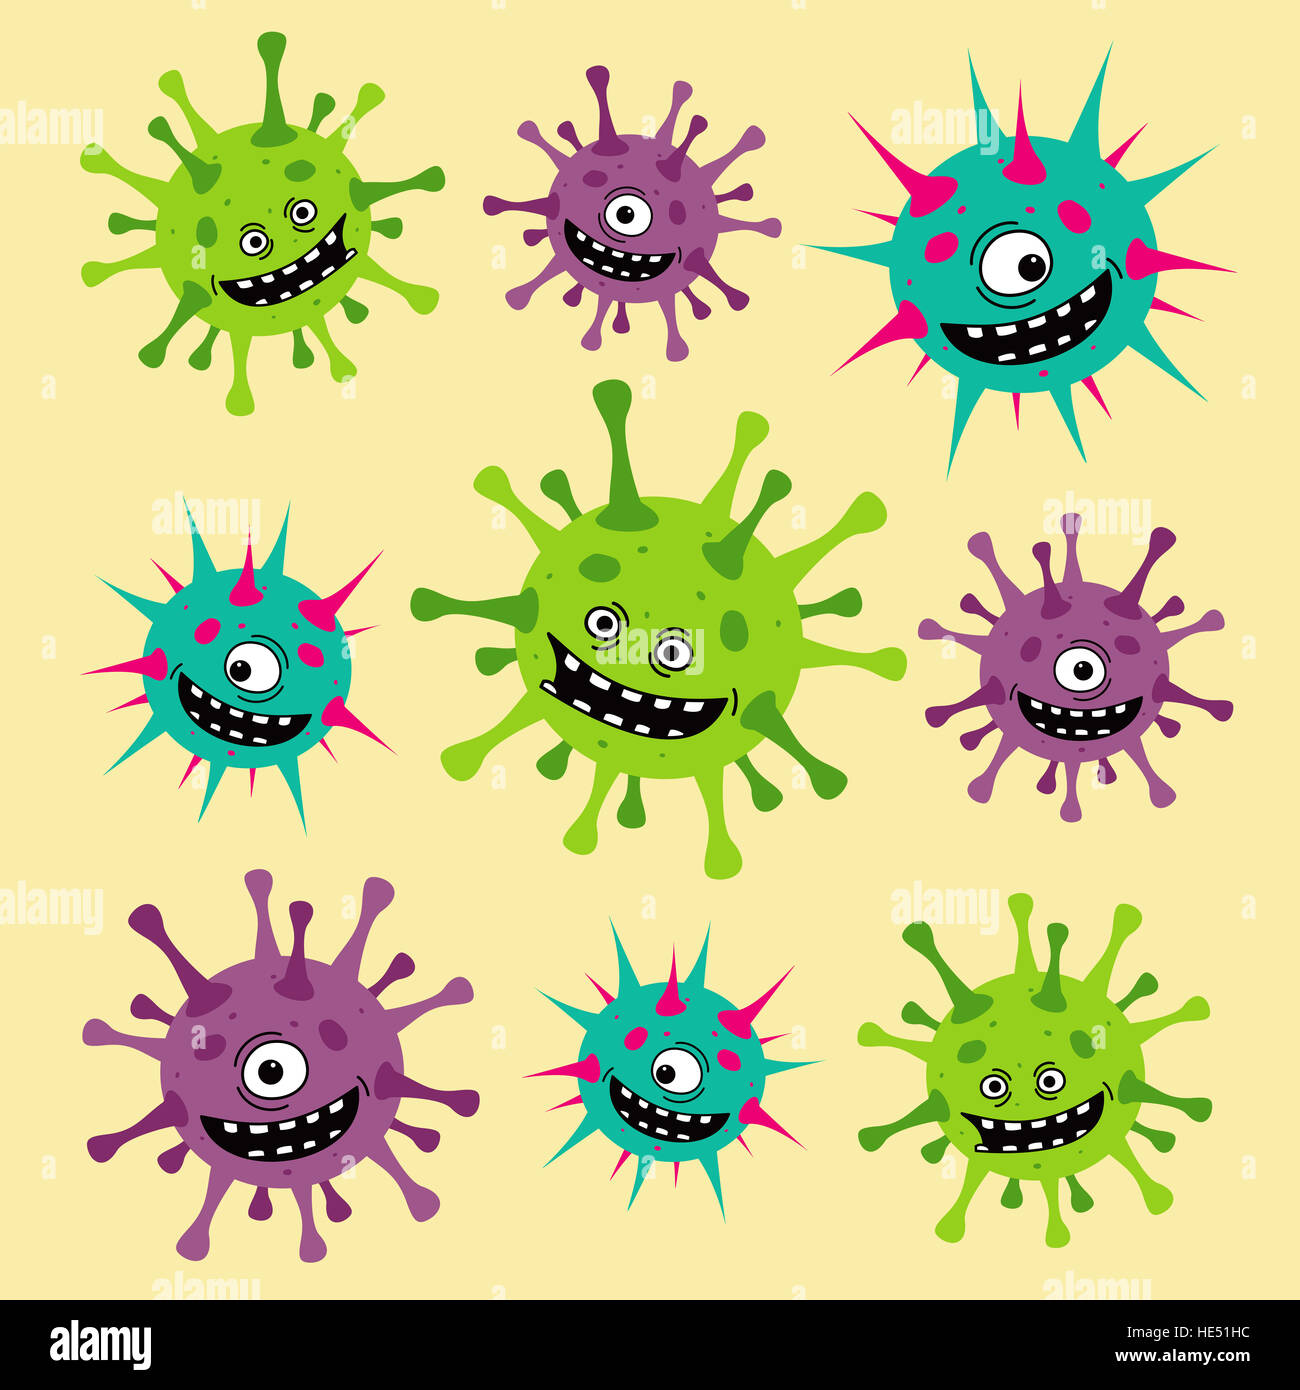 Cartoon viruses, germs or bacteria pattern. Funny colorful set on yellow background Stock Photo